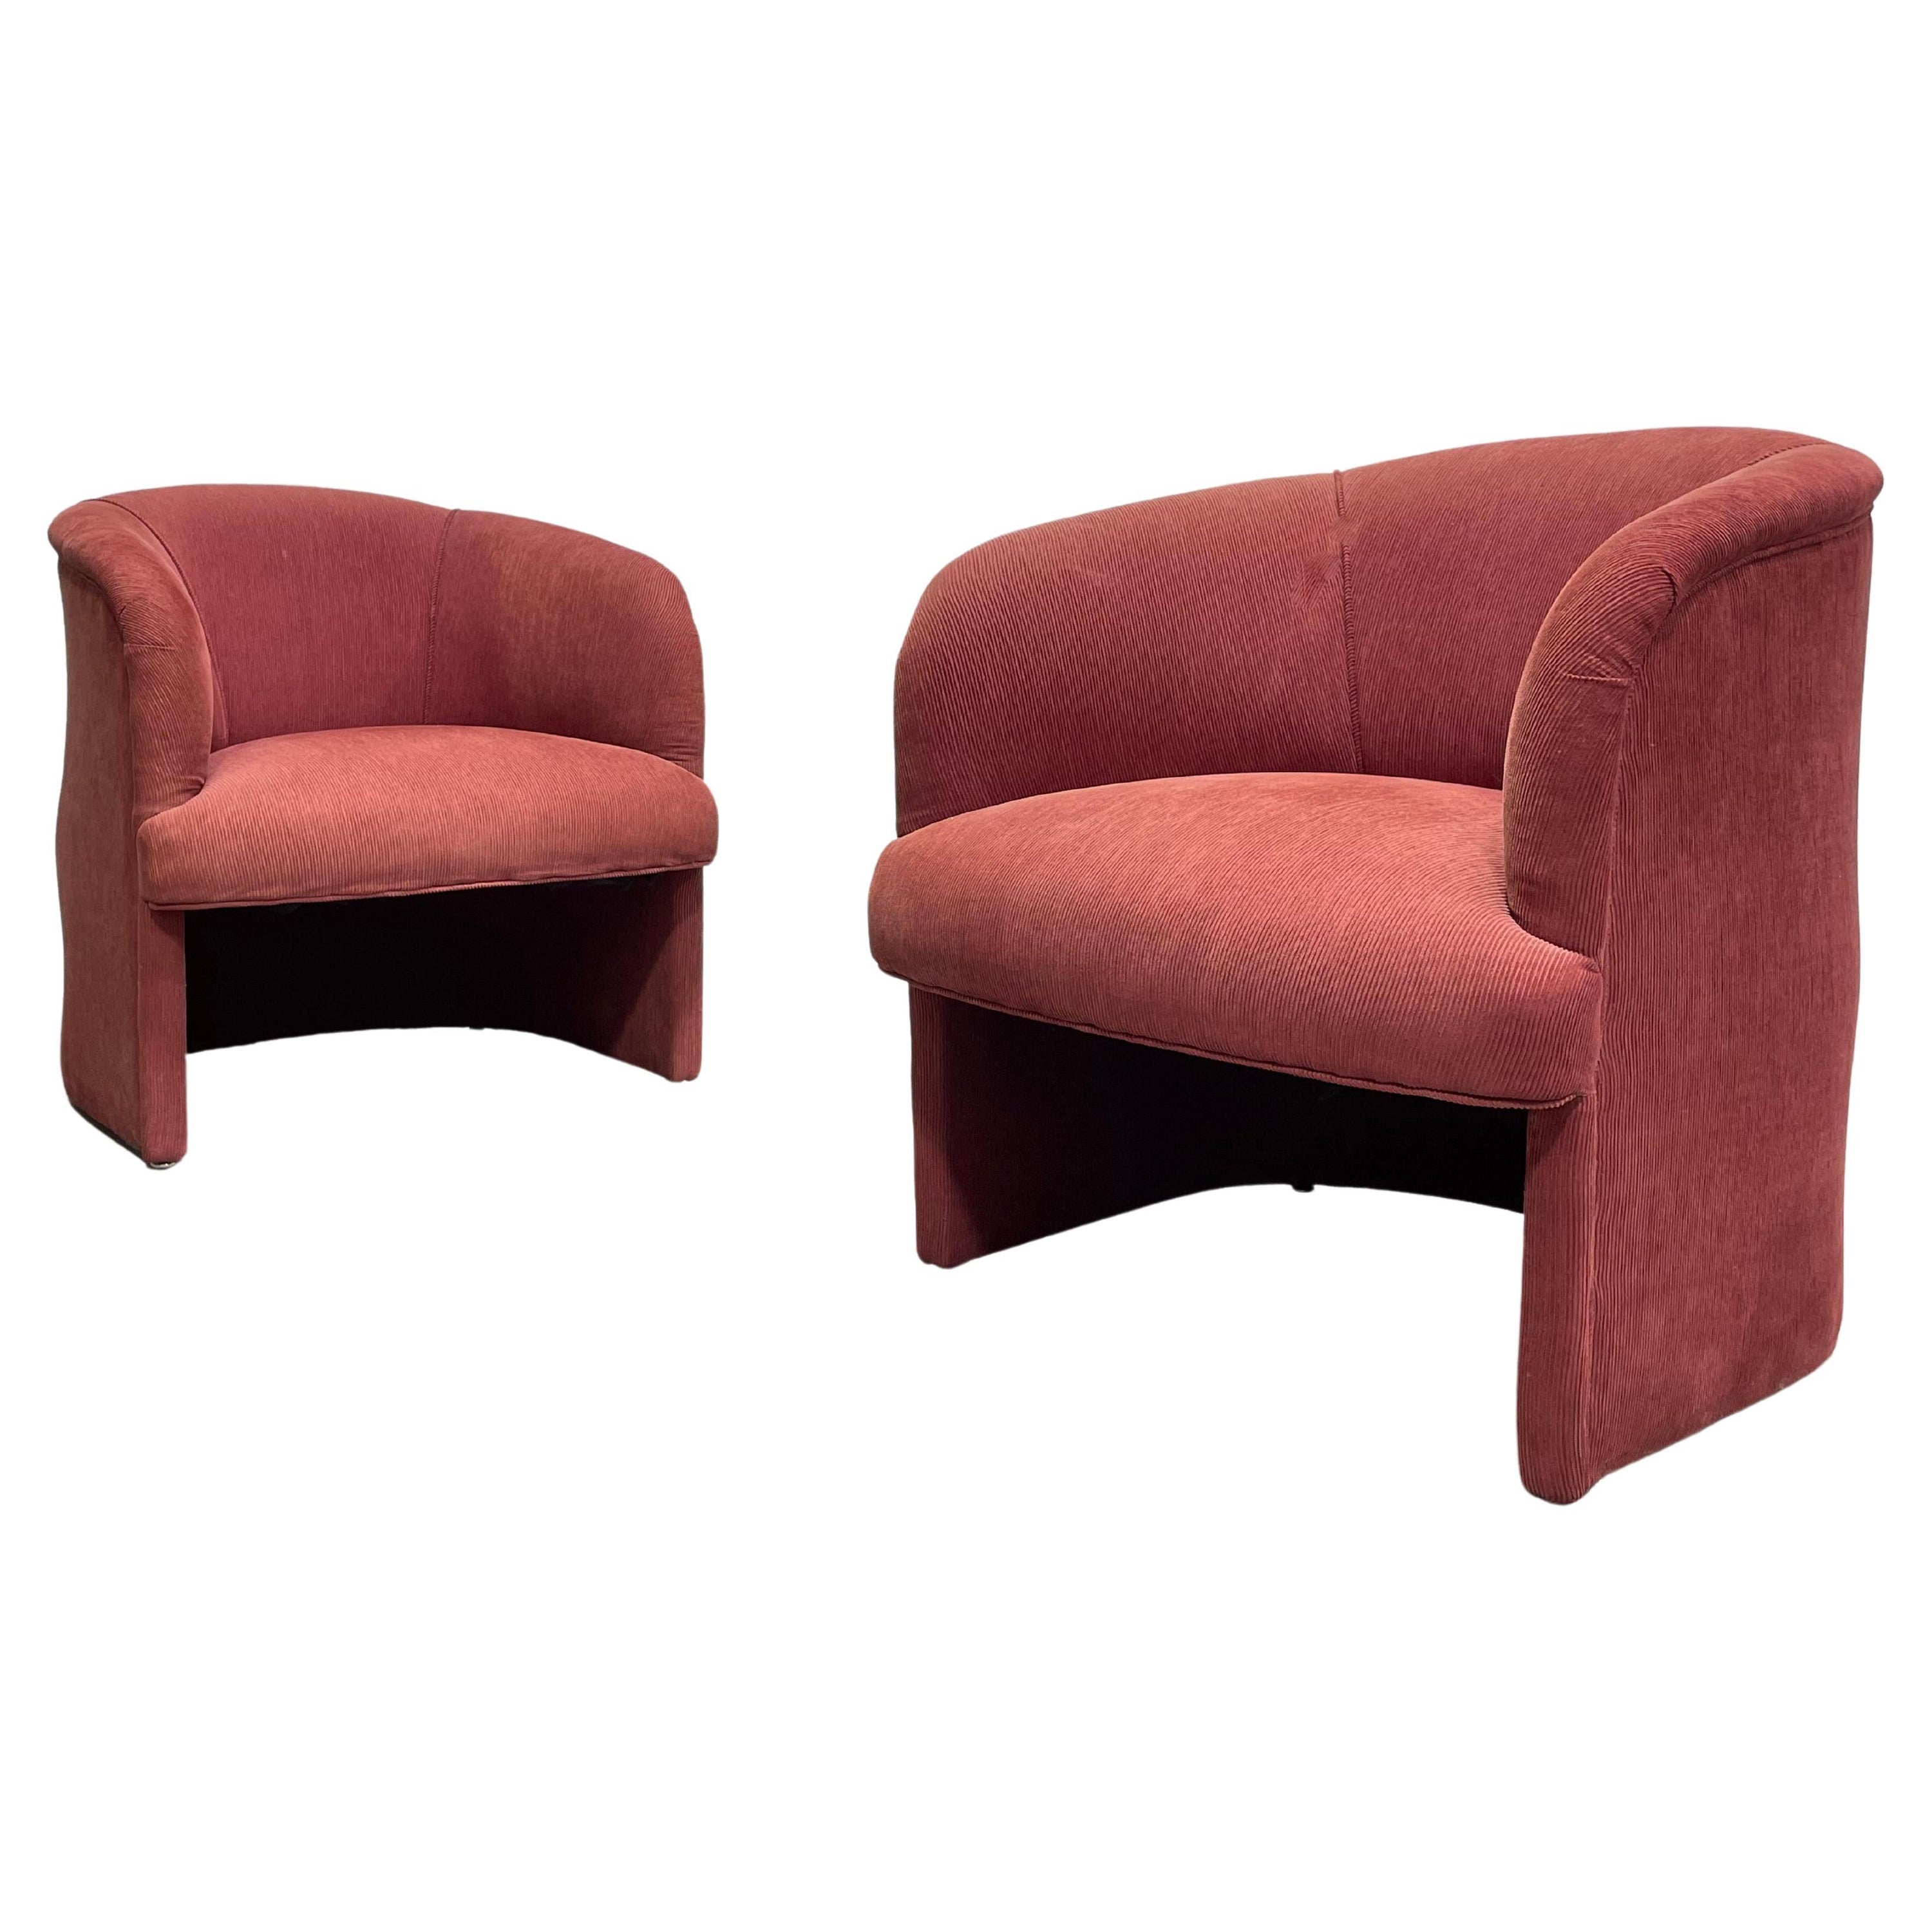 Postmodern Lounge Chairs / Armchairs, a Pair For Sale